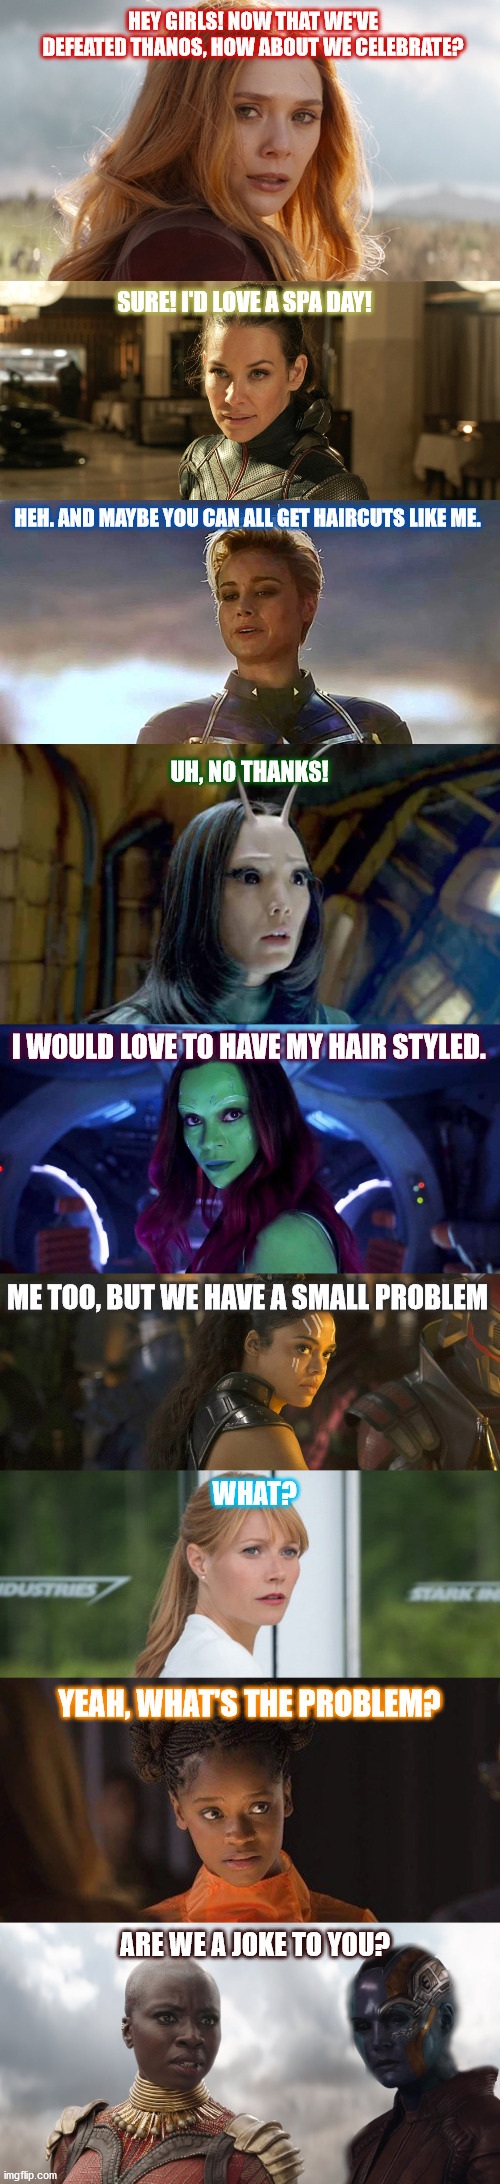 Took me FOREVER to create this, and I even had to do some photoshopping, lol. | HEY GIRLS! NOW THAT WE'VE DEFEATED THANOS, HOW ABOUT WE CELEBRATE? SURE! I'D LOVE A SPA DAY! HEH. AND MAYBE YOU CAN ALL GET HAIRCUTS LIKE ME. UH, NO THANKS! I WOULD LOVE TO HAVE MY HAIR STYLED. ME TOO, BUT WE HAVE A SMALL PROBLEM; WHAT? YEAH, WHAT'S THE PROBLEM? ARE WE A JOKE TO YOU? | image tagged in marvel,avengers endgame | made w/ Imgflip meme maker